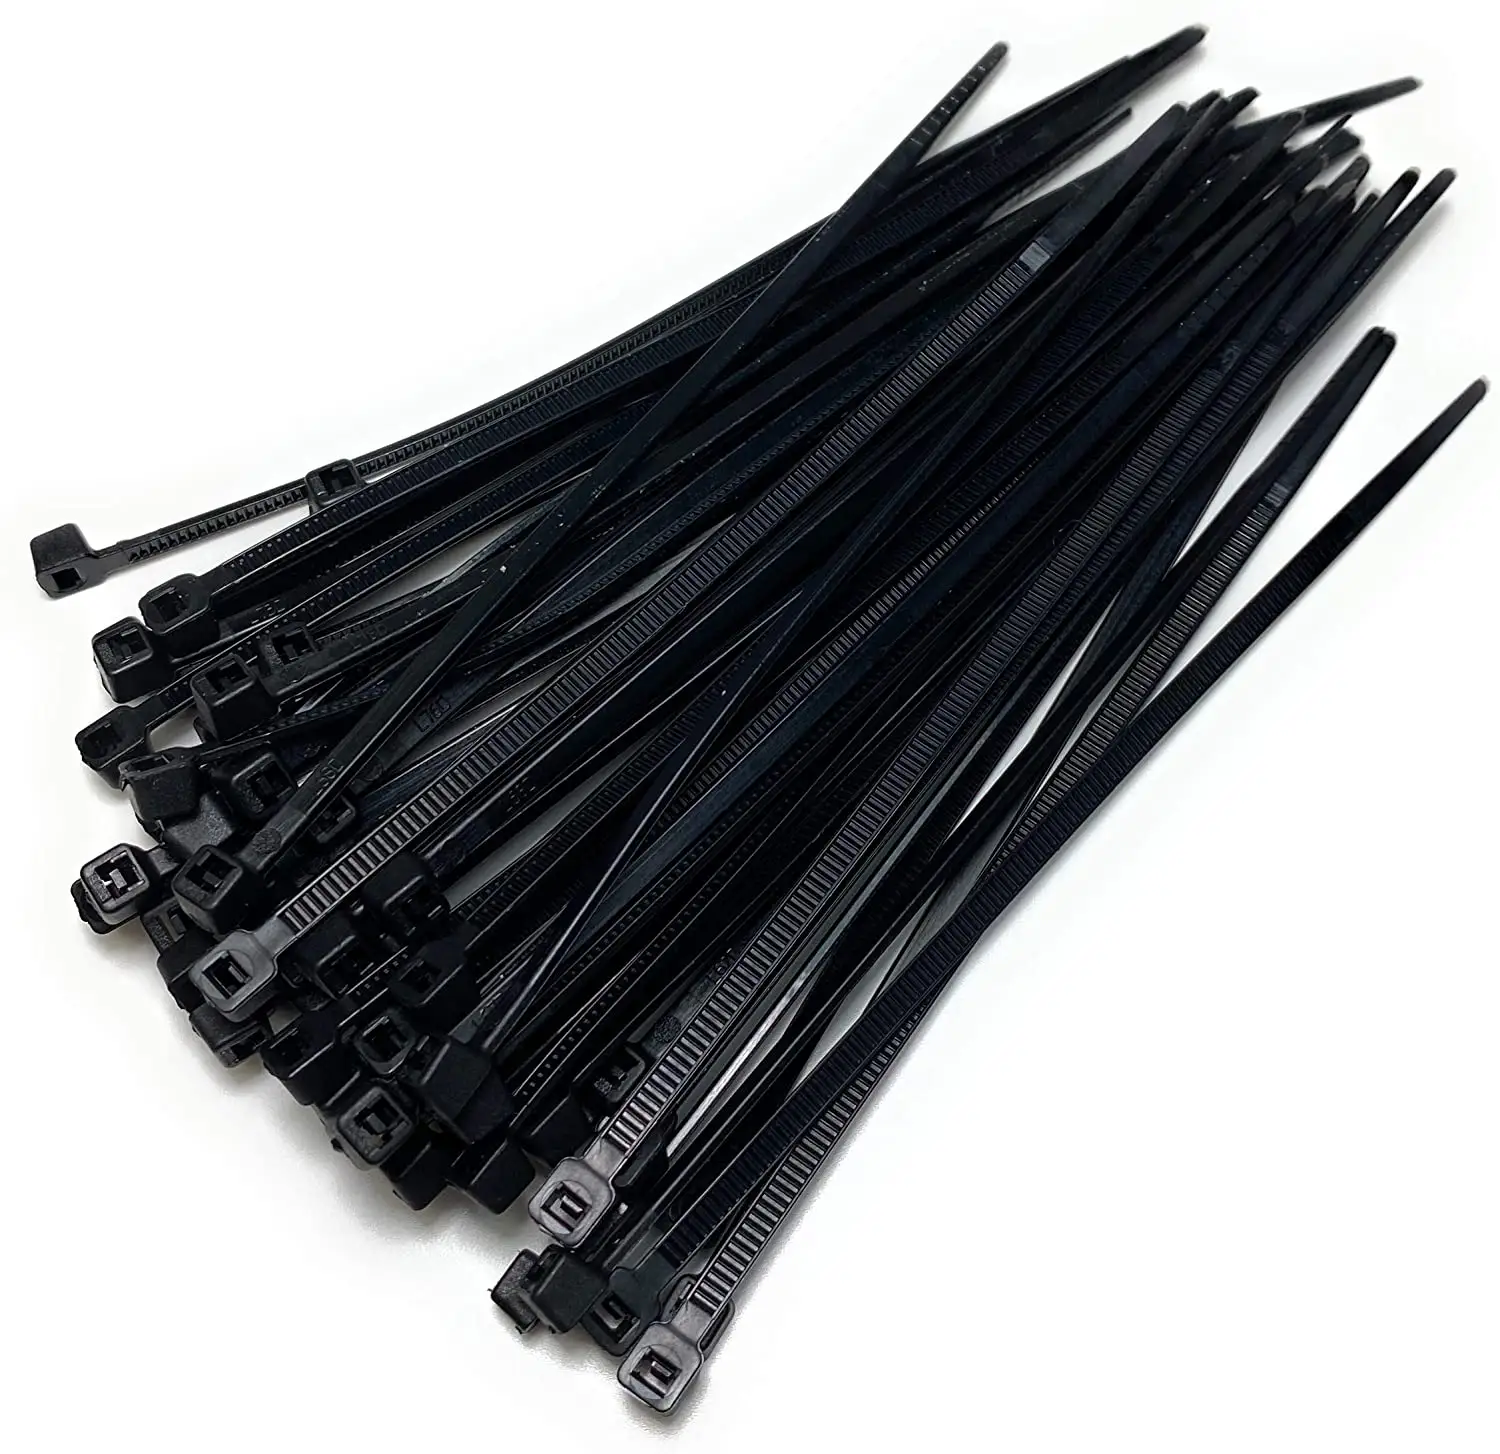 Black Plastic Cable Ties Long and Wide Extra Large Zip Ties wrap Extra Heavy Duty Ties